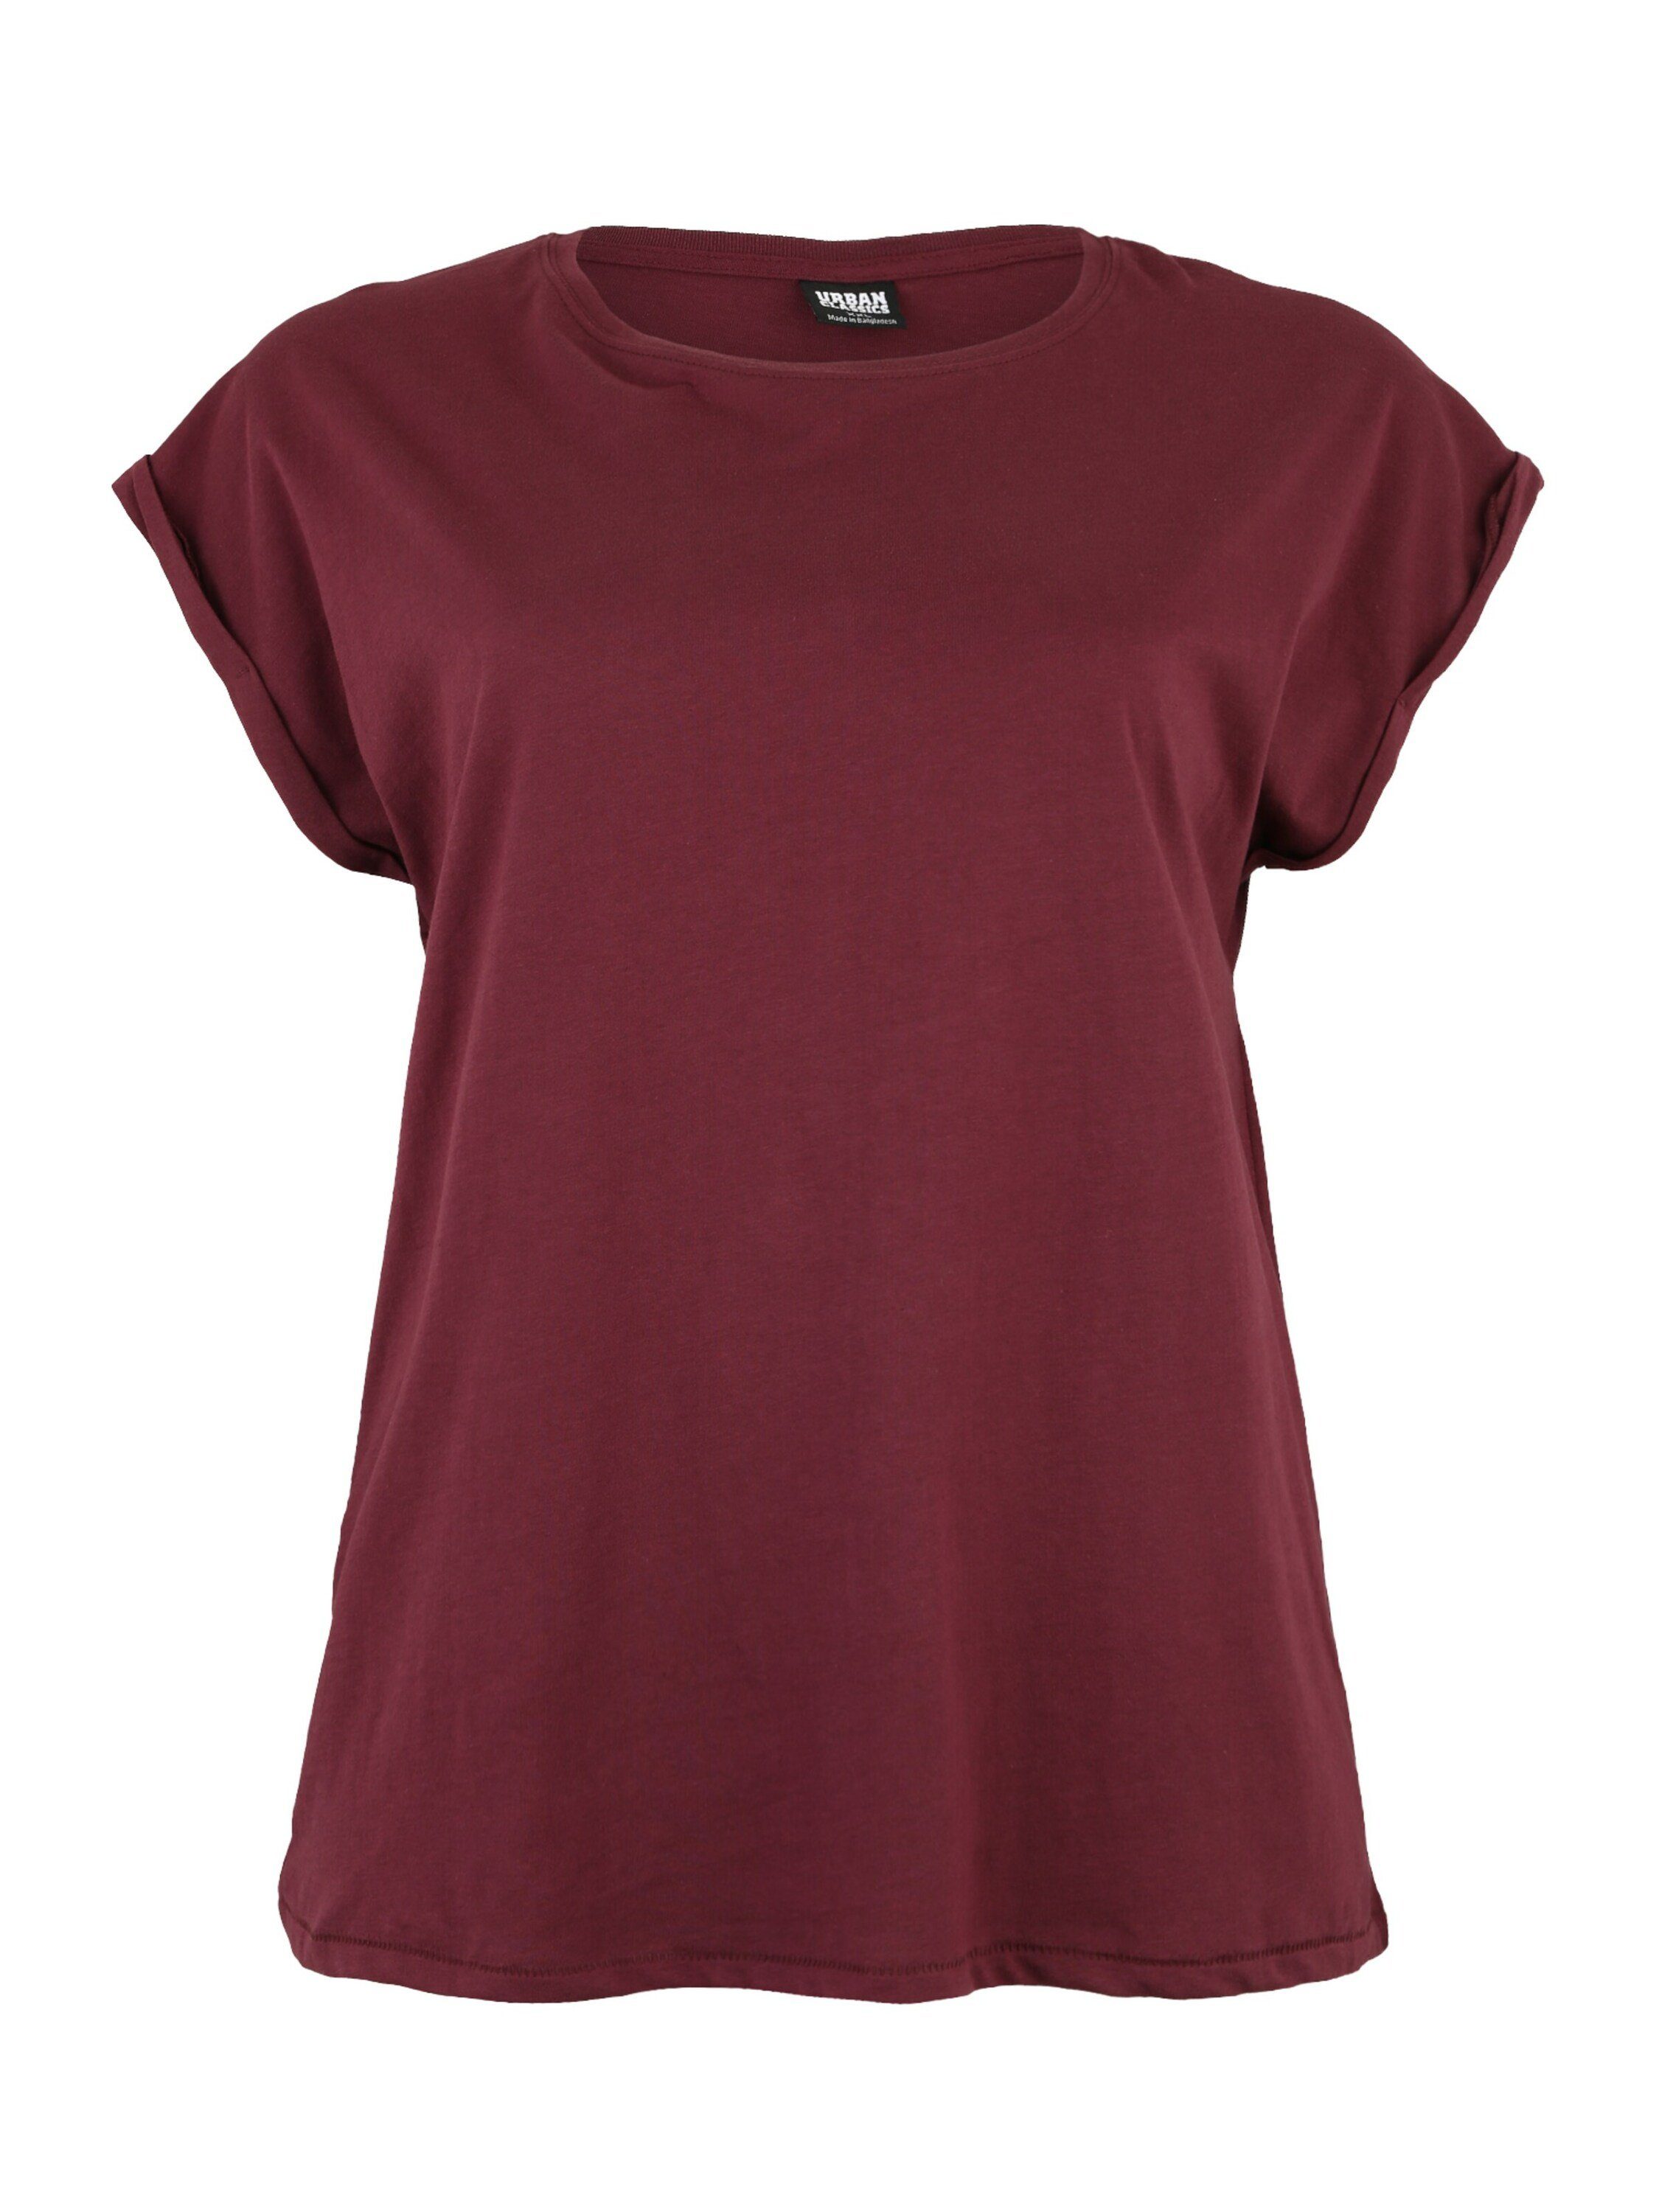 URBAN CLASSICS T-Shirt (1-tlg) Plain/ohne Details, Weiteres Detail brombeer